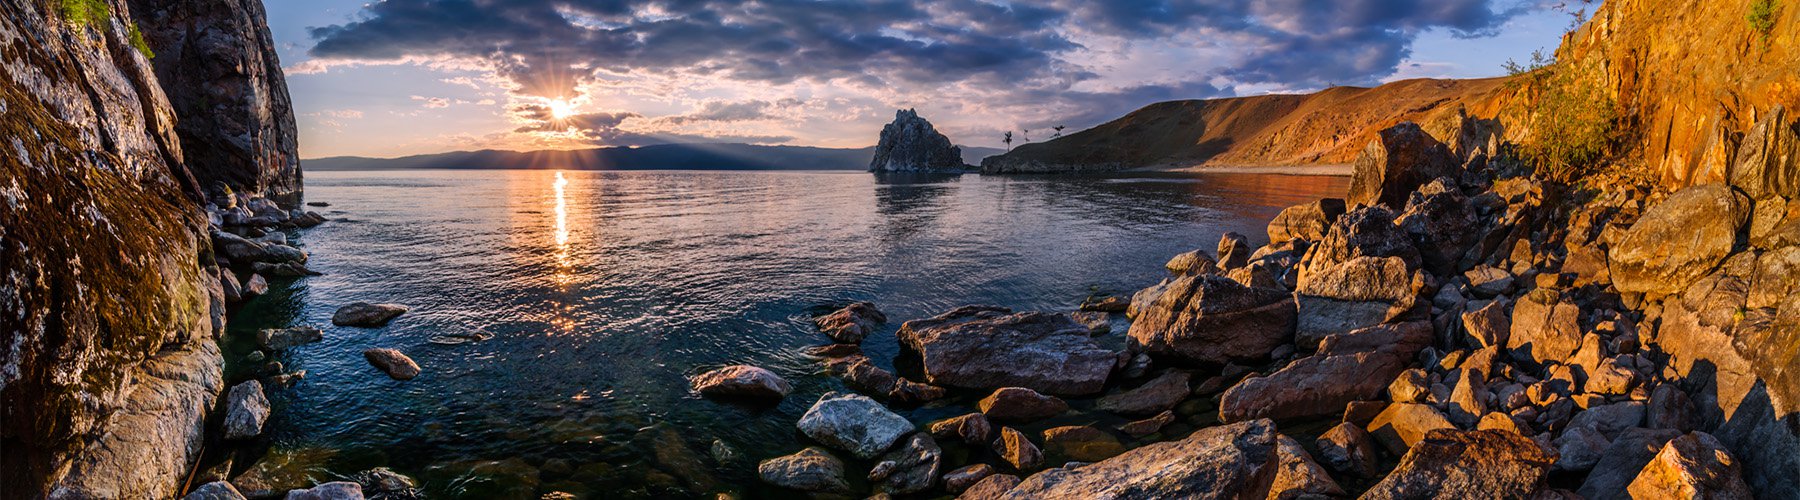 Lake Baikal tours and travels to Siberia, the most beautiful part of Russia